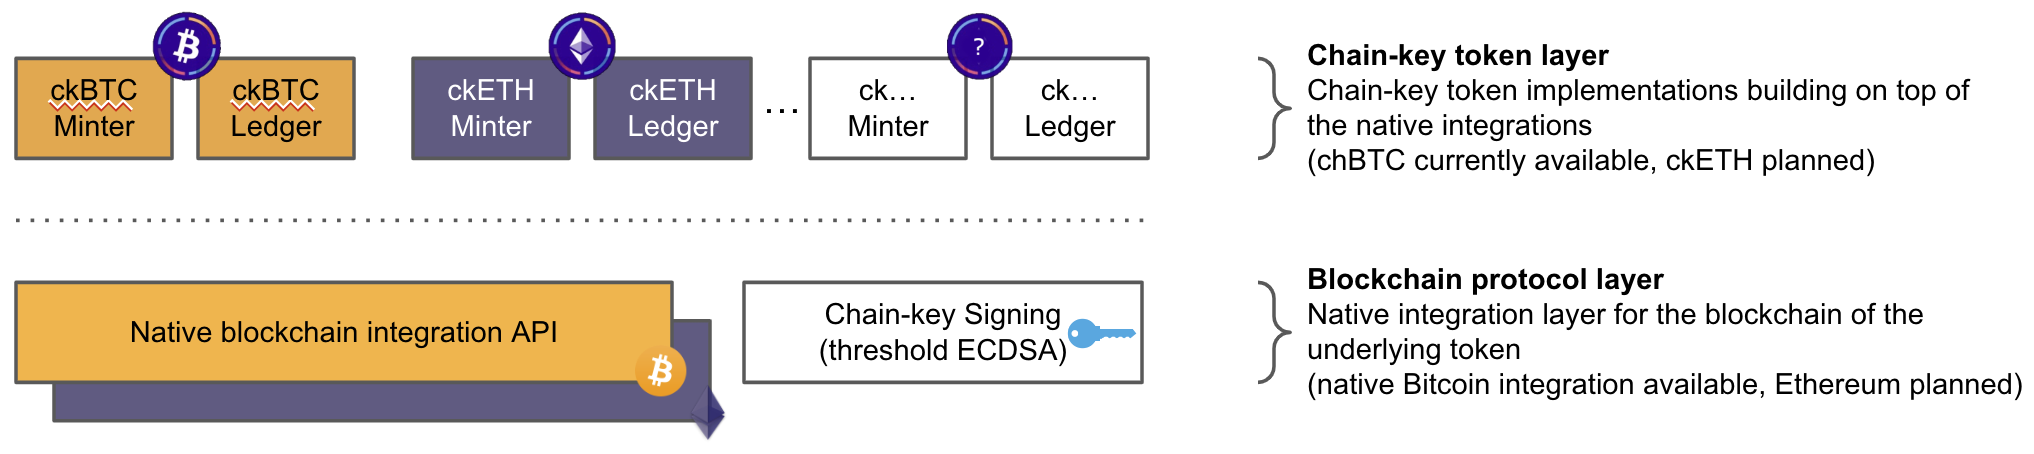 Architecture for chain-key tokens